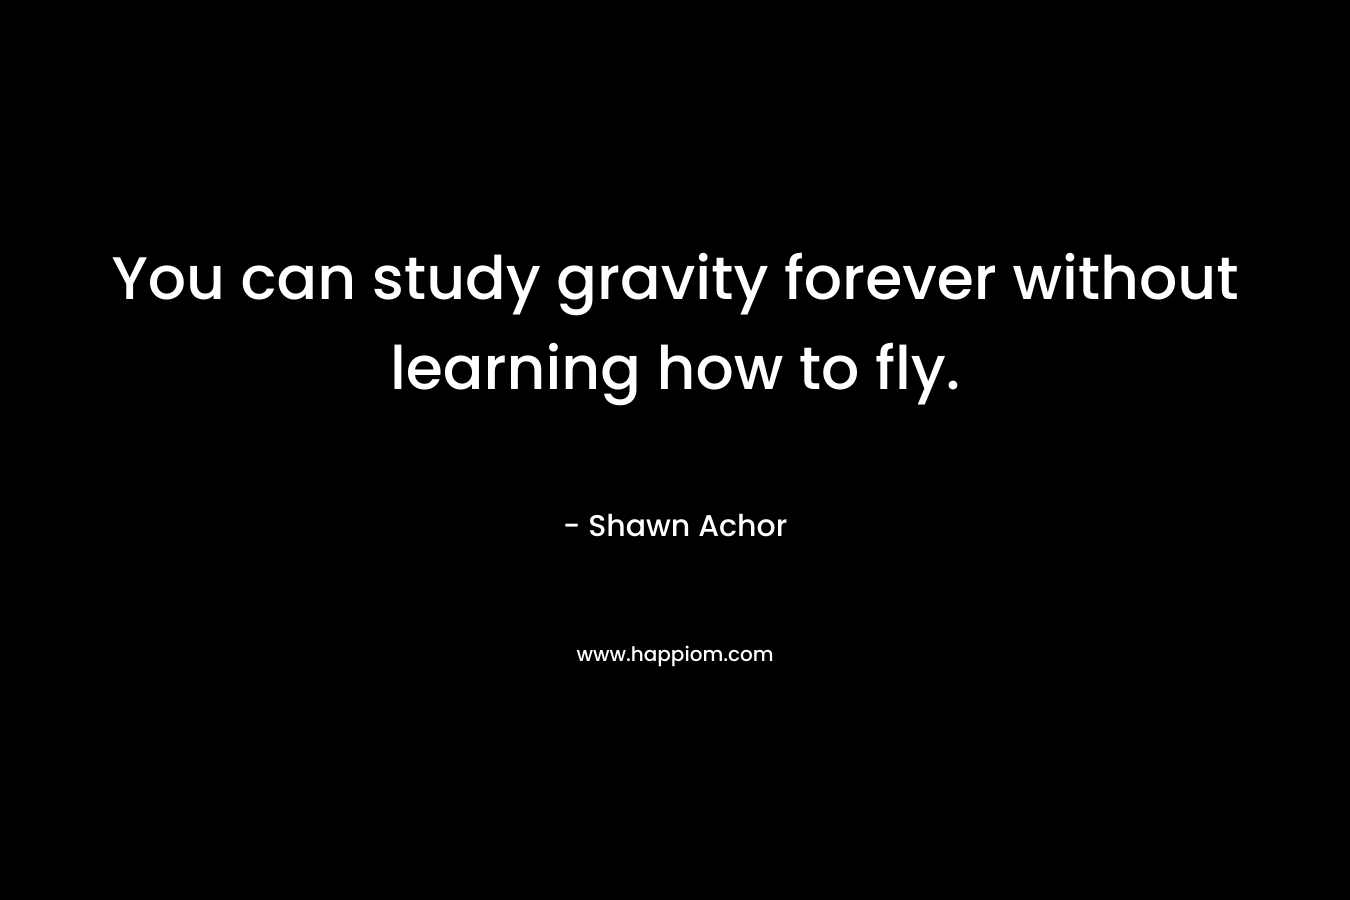 You can study gravity forever without learning how to fly.